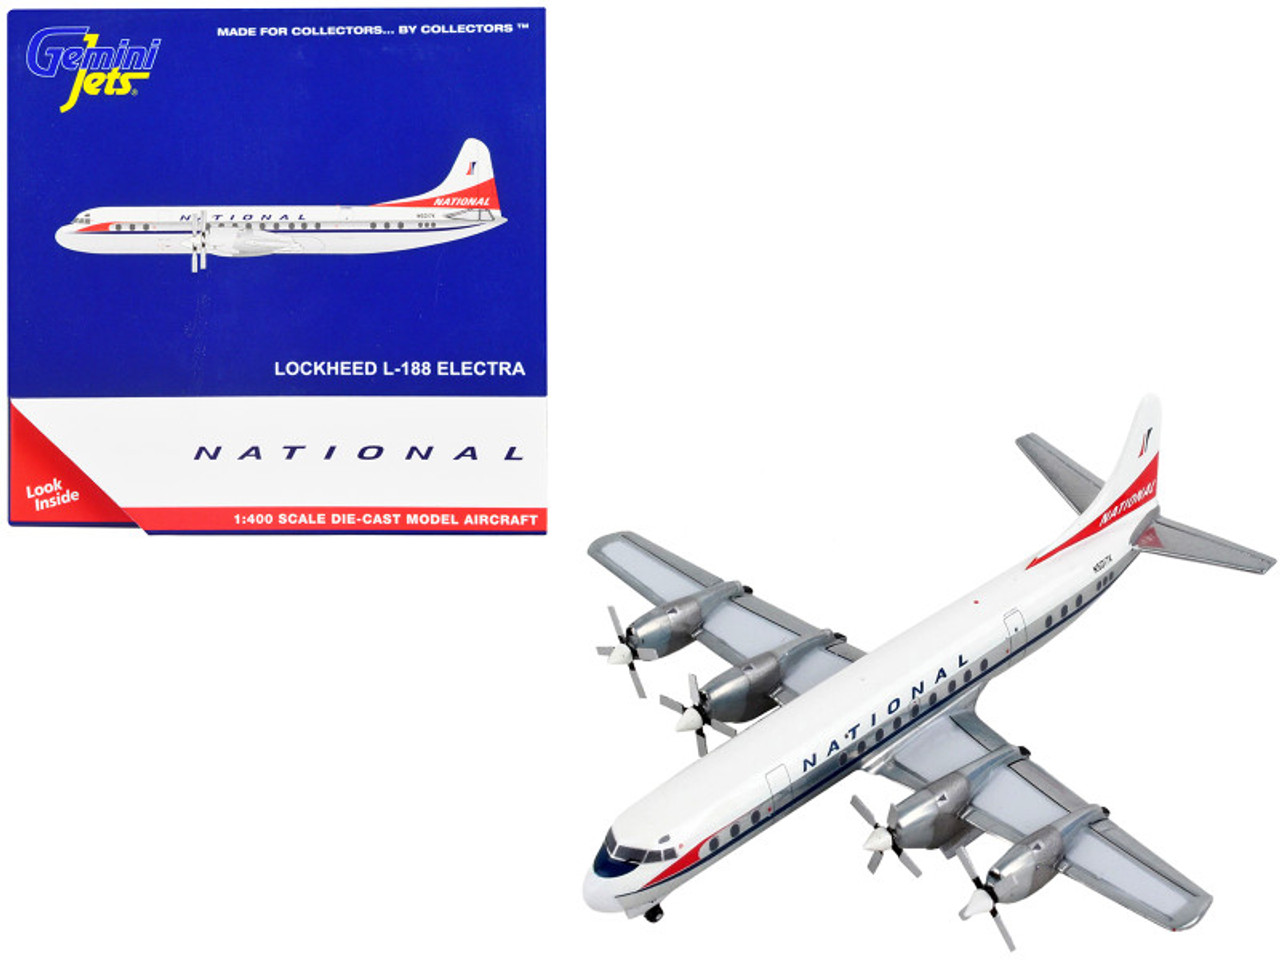 Lockheed L-188 Electra Commercial Aircraft "National Airlines" White with Red Tail 1/400 Diecast Model Airplane by GeminiJets